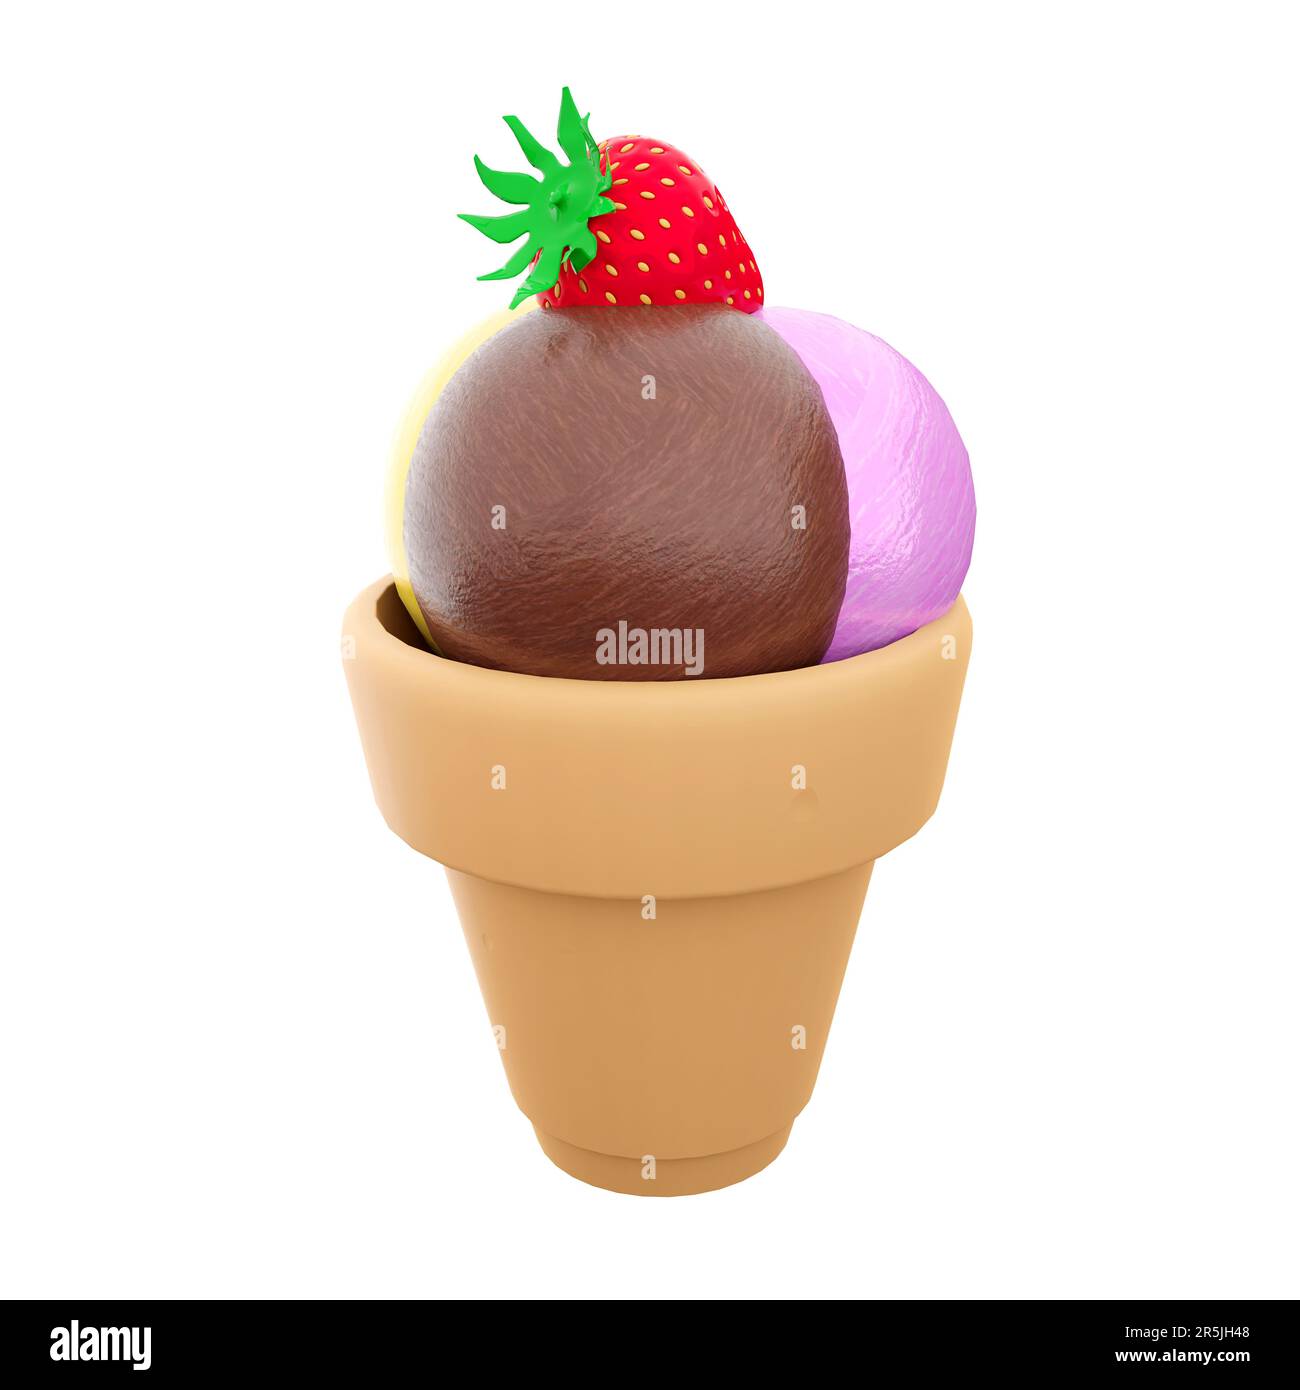 https://c8.alamy.com/comp/2R5JH48/3d-rendering-three-ice-cream-balls-of-ice-cream-with-banana-chocolate-raspberry-flavor-and-strawberries-on-top-icon-3d-render-sundae-ice-cream-icon-2R5JH48.jpg